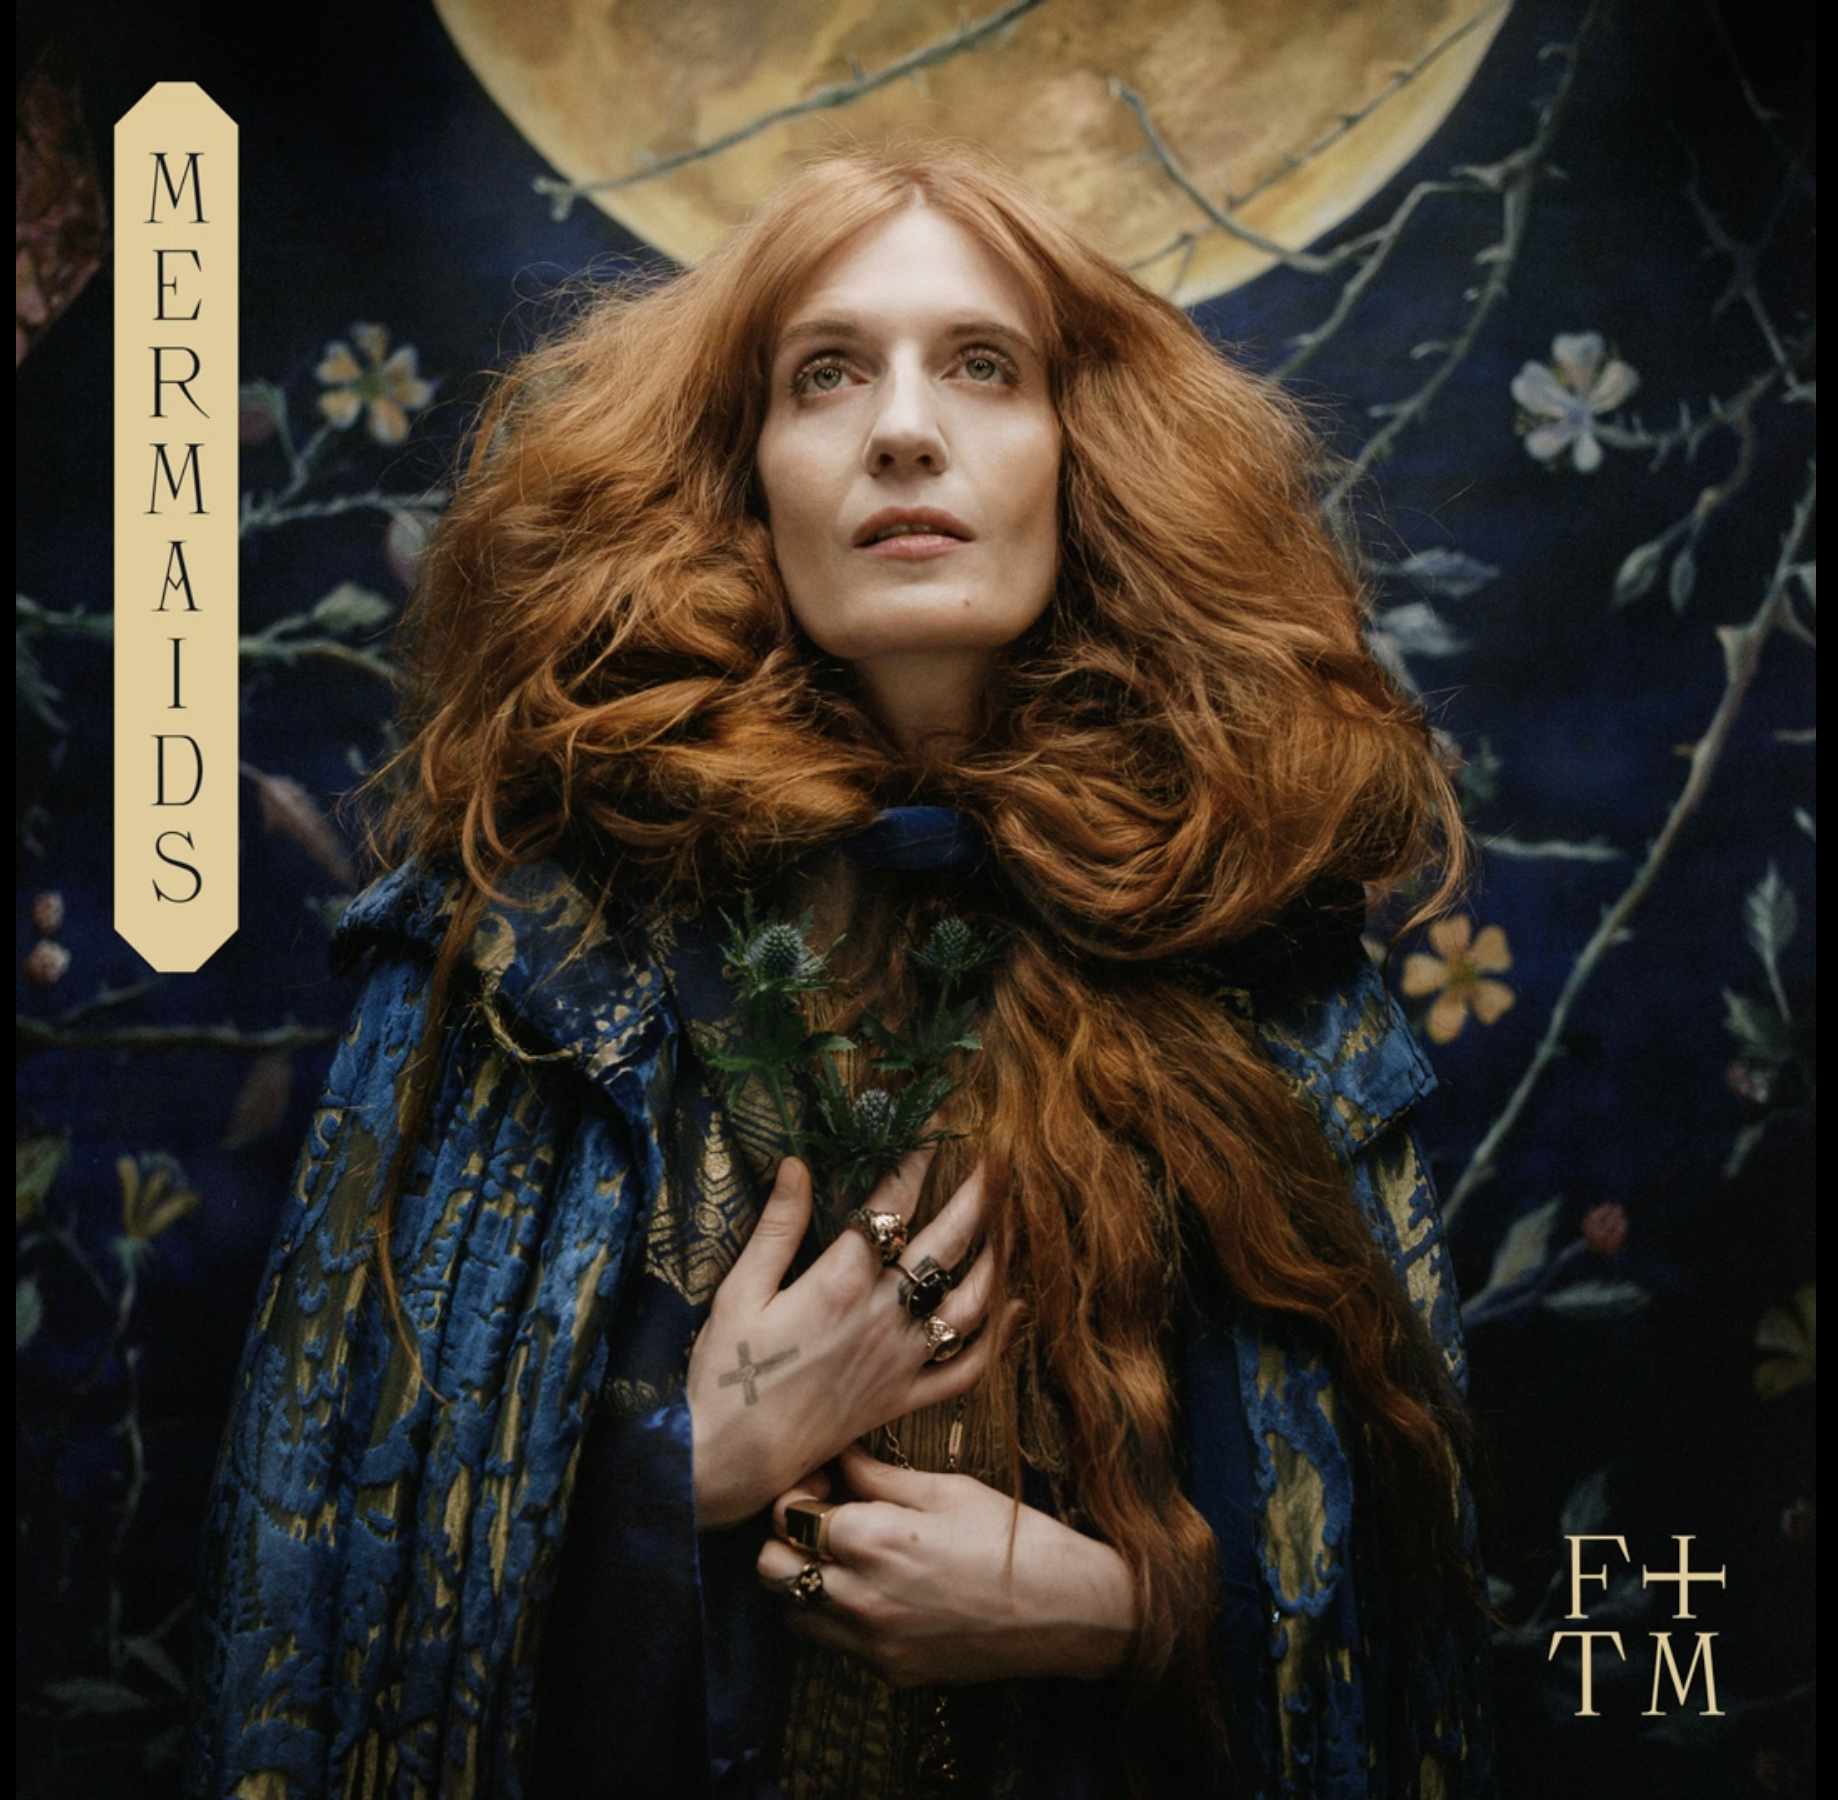 Mermaids - Florence and the Machine CREDIT: Autumn de Wilde